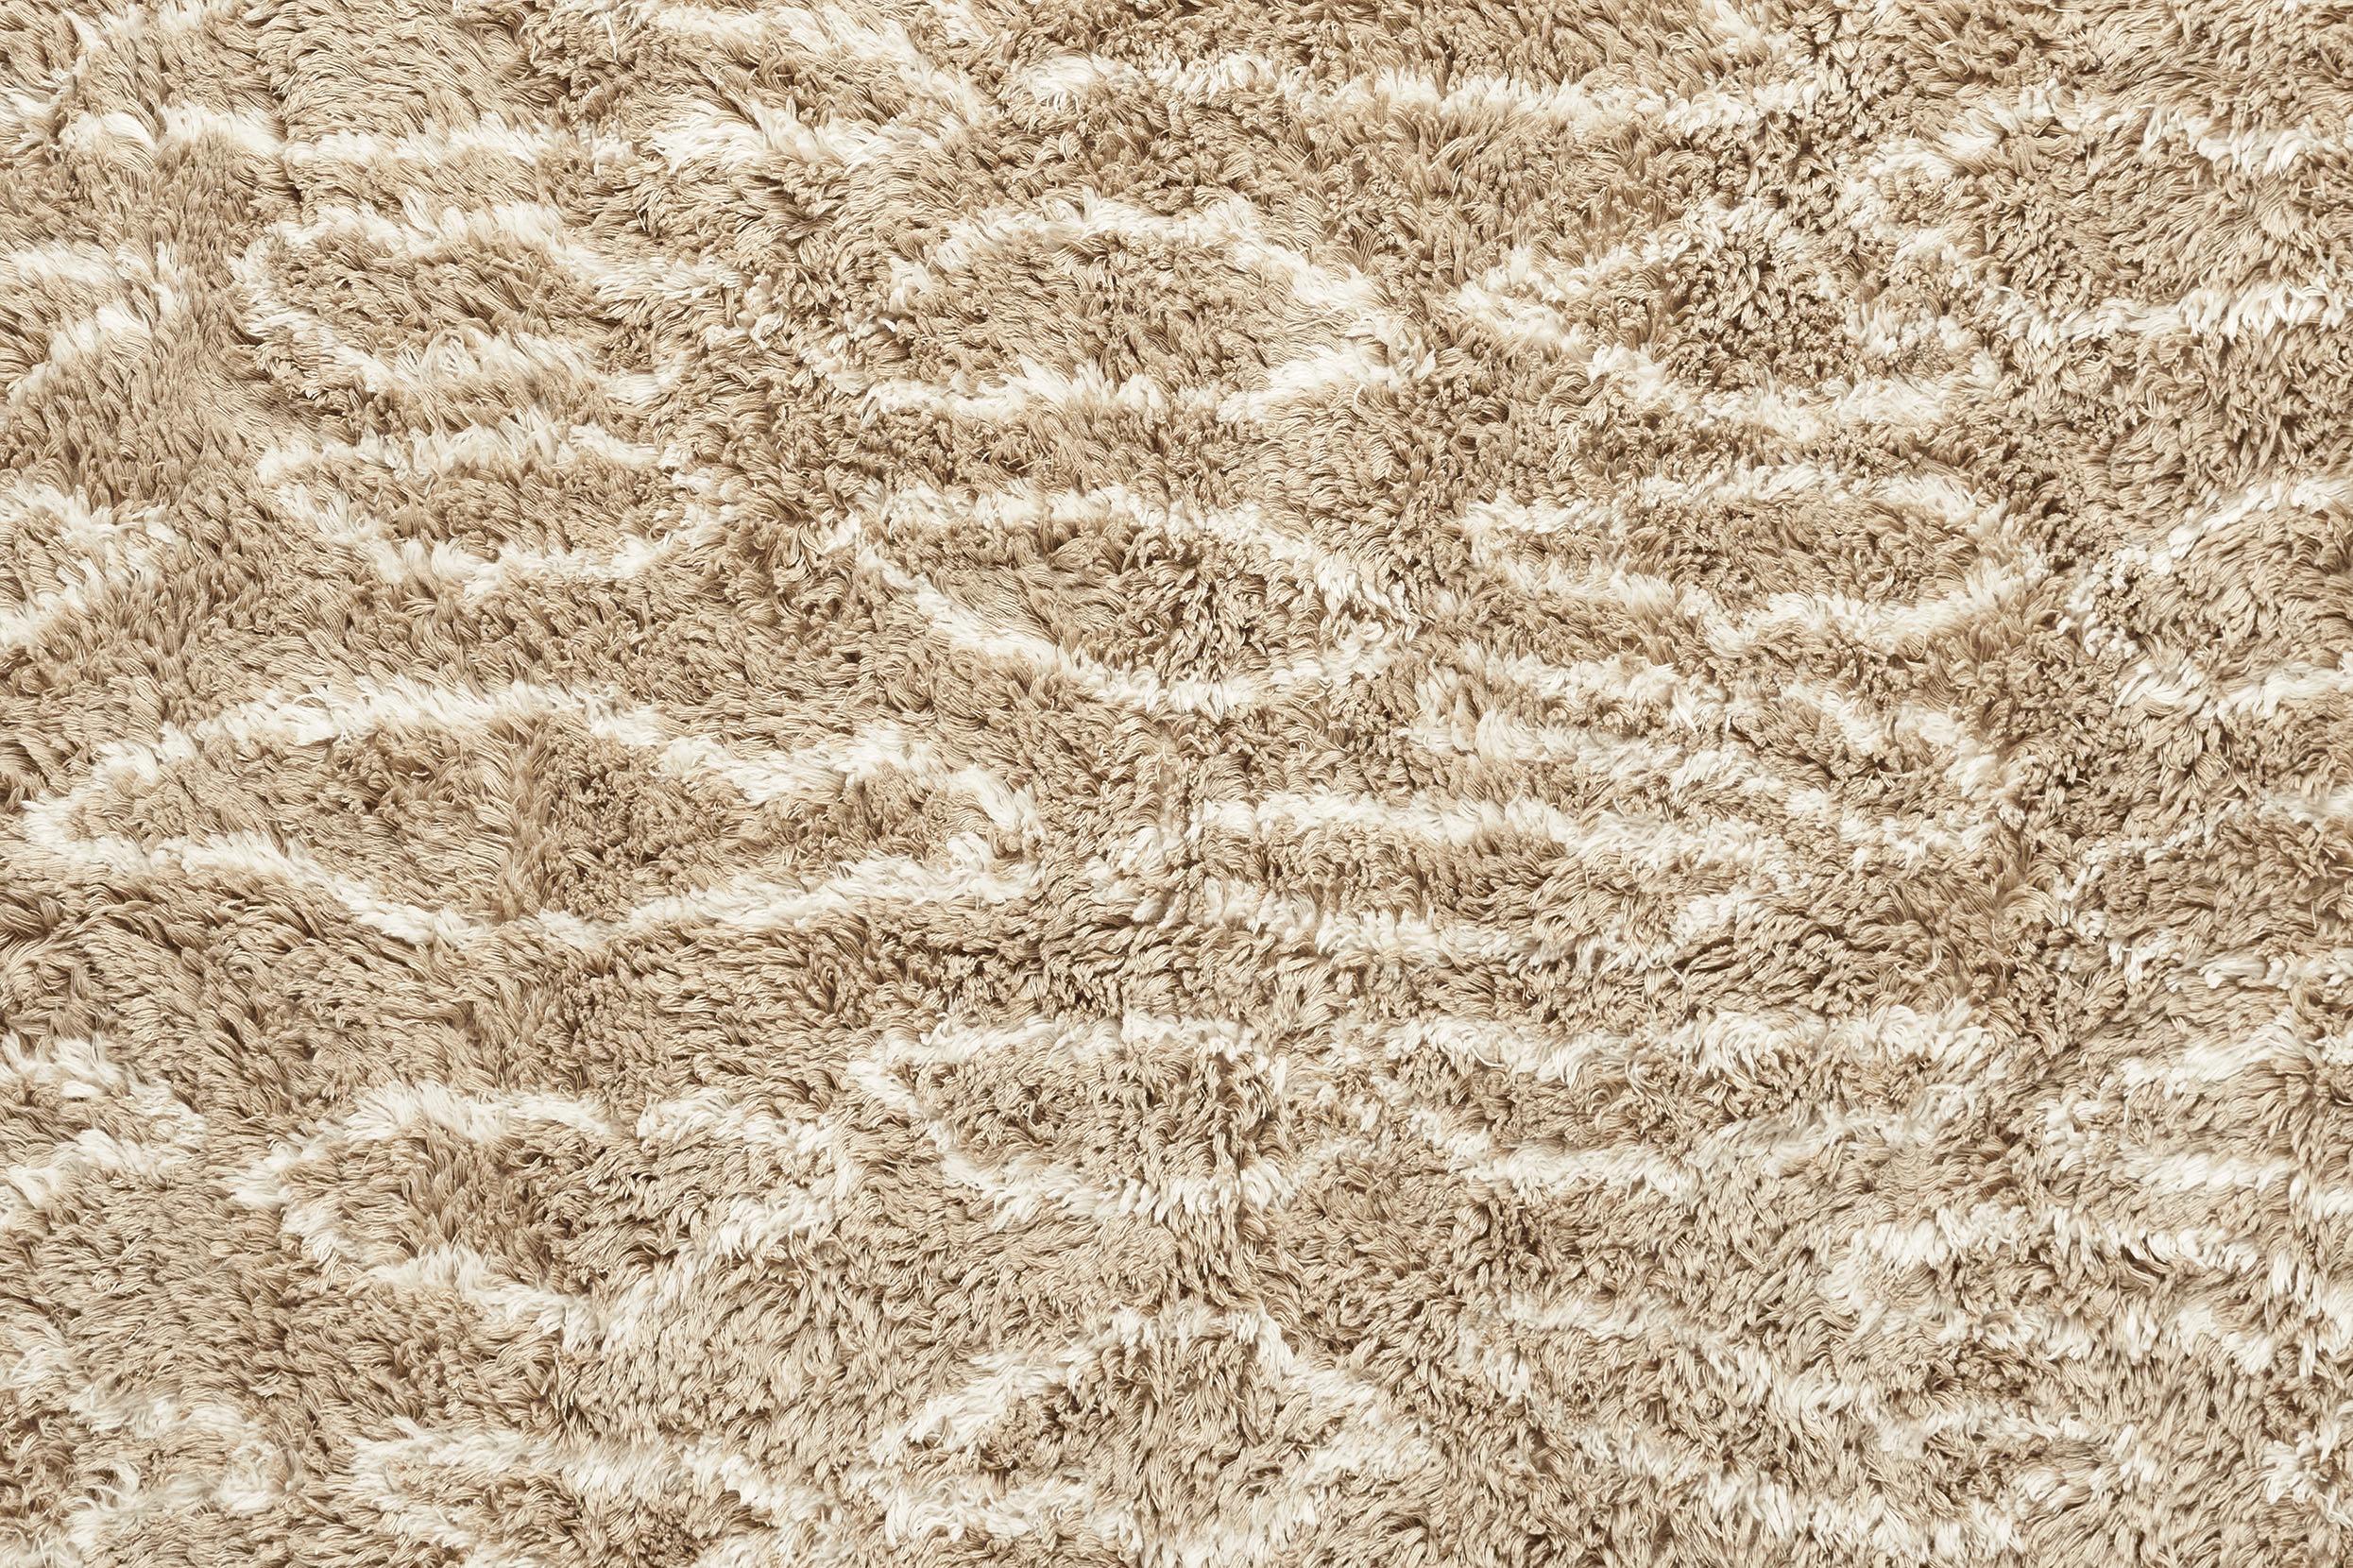 Hand tufted 100 % wool pile with cotton backing, each rug has a unique and irregular leo pattern and with that gets a really cool 70s vibe.

Available in beige and grey.

Material: Hand woven 100 % wool. 

Size: 200 x 300 cm / 6 x 9 feet.
 